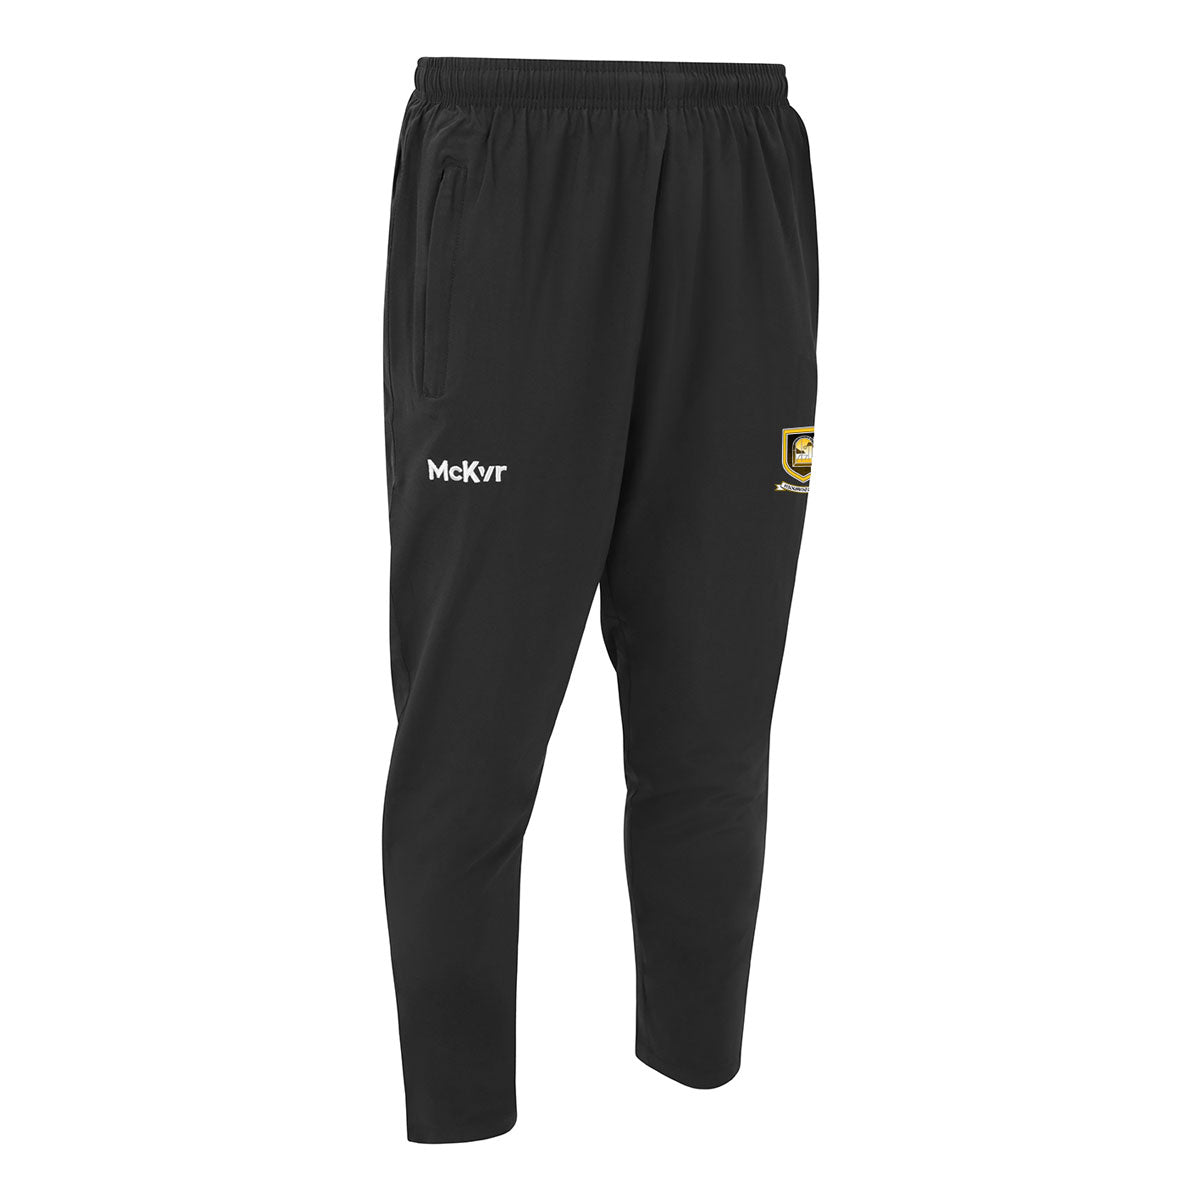 Mc Keever Mourneabbey LGFA Core 22 Tapered Pants - Youth - Black